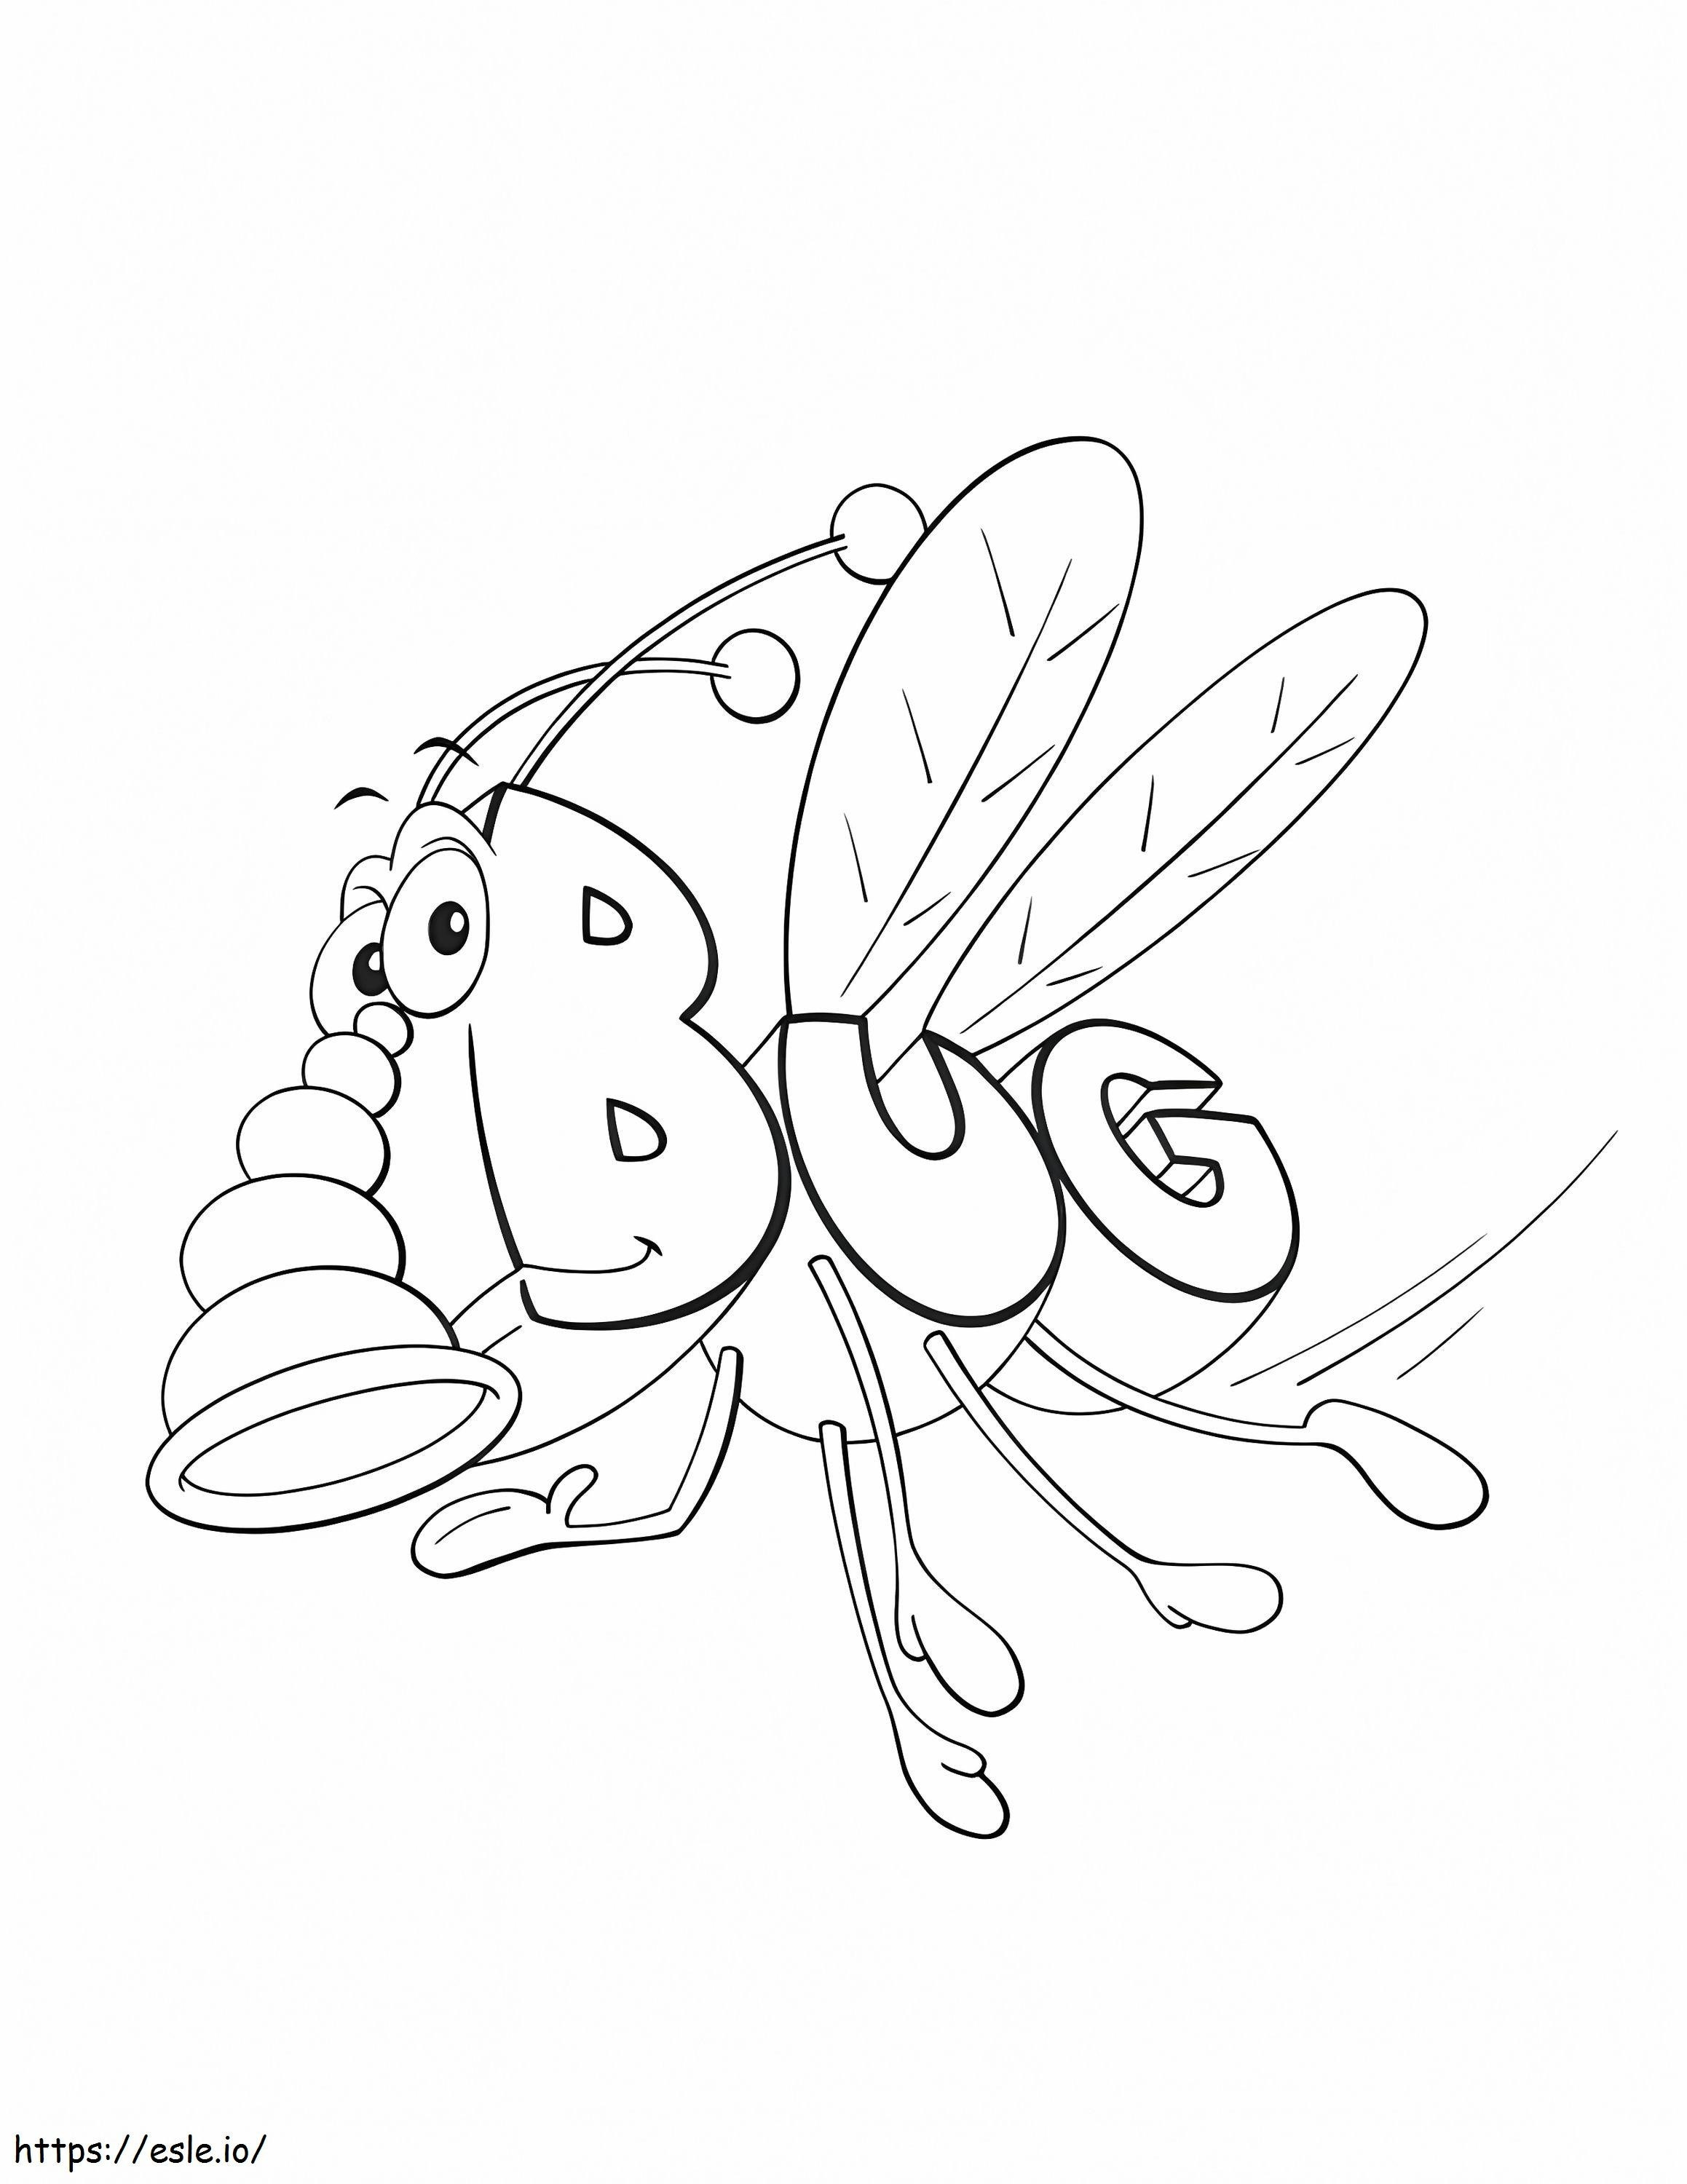 Bug WordWorld Coloring Page coloring page